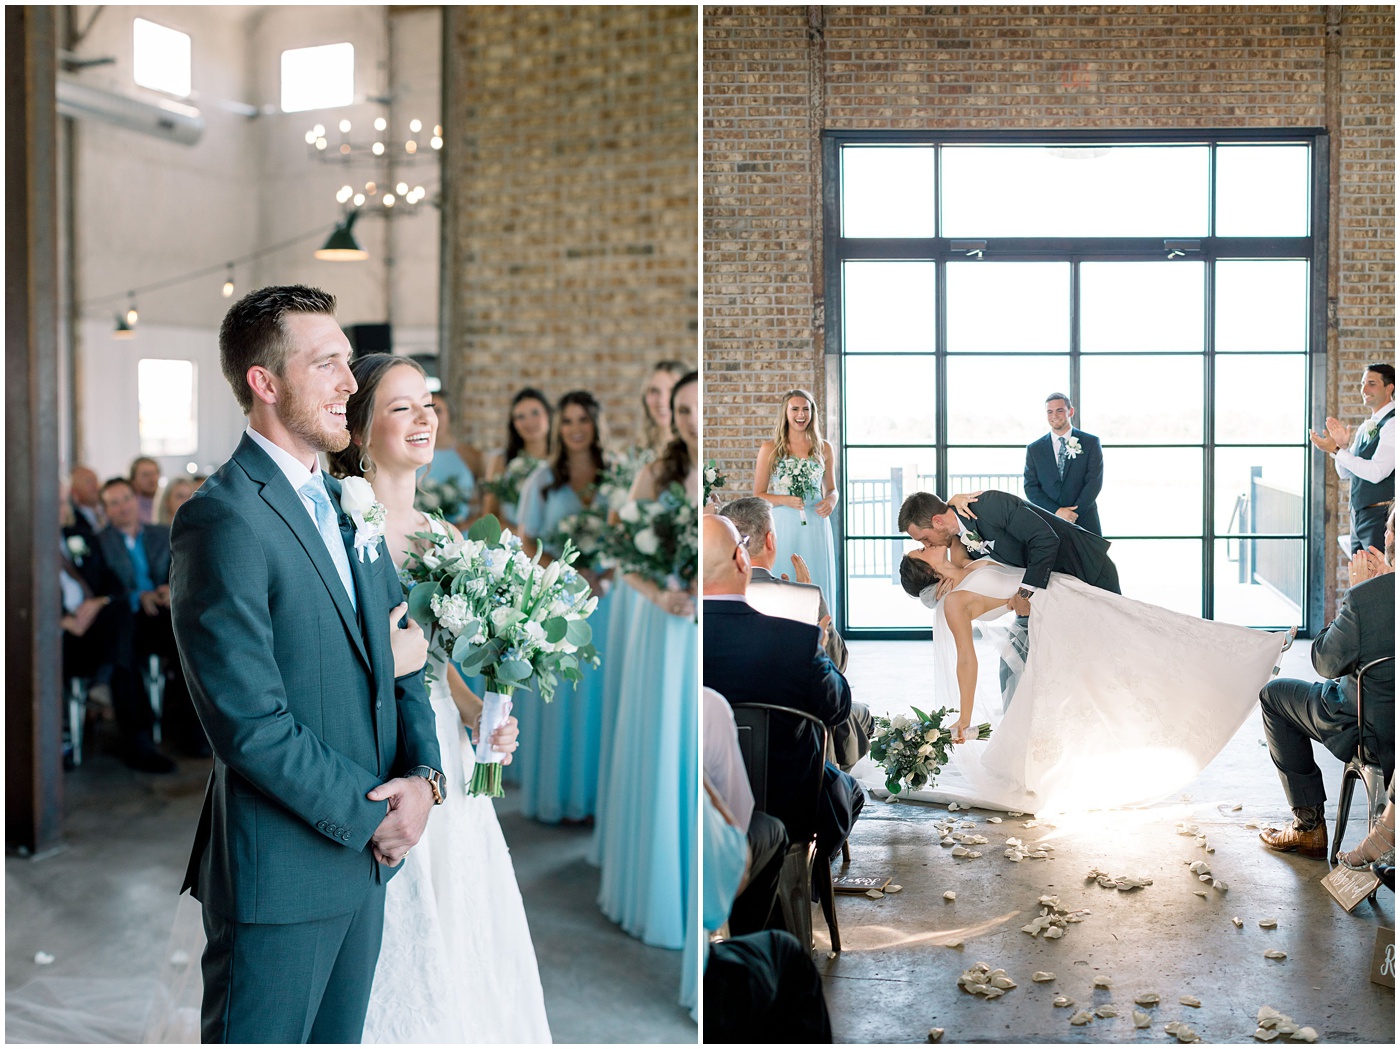 Texas wedding photographer captures bride and groom dip and kiss during the ceremony